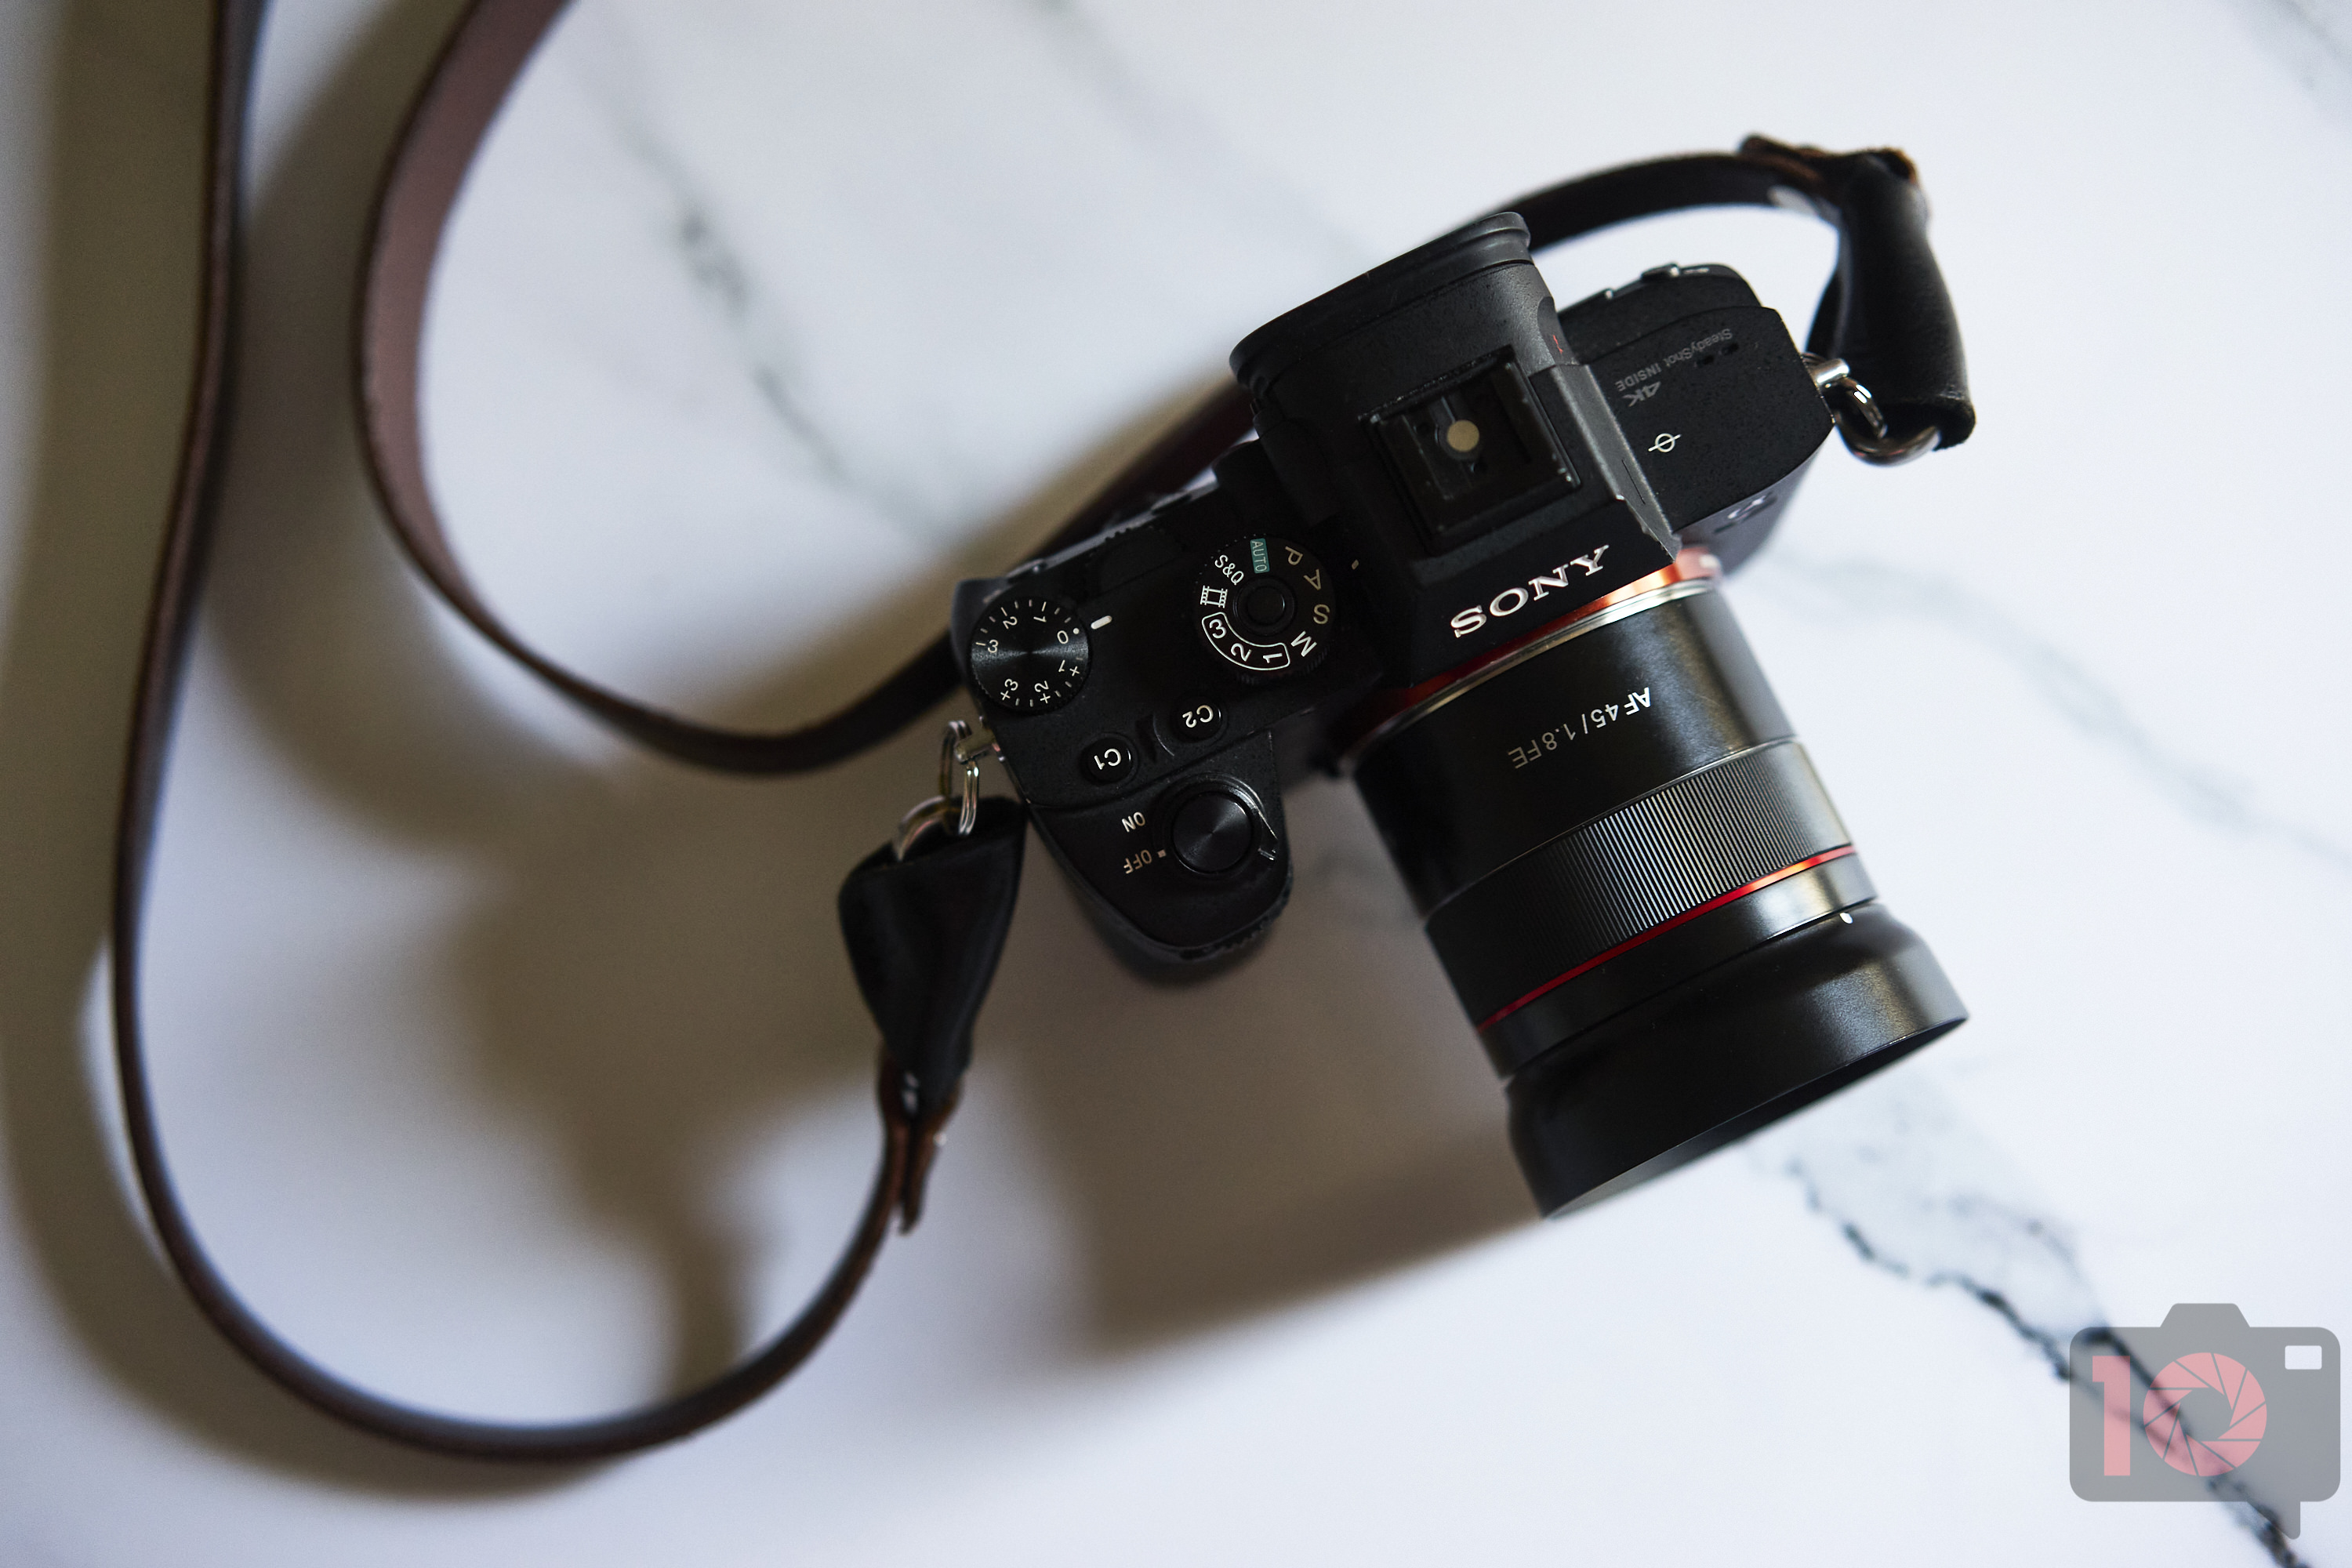 Chris Gampat The Phoblographer Samyang 45mm f1.8 Review product photos 2.21-160s1600